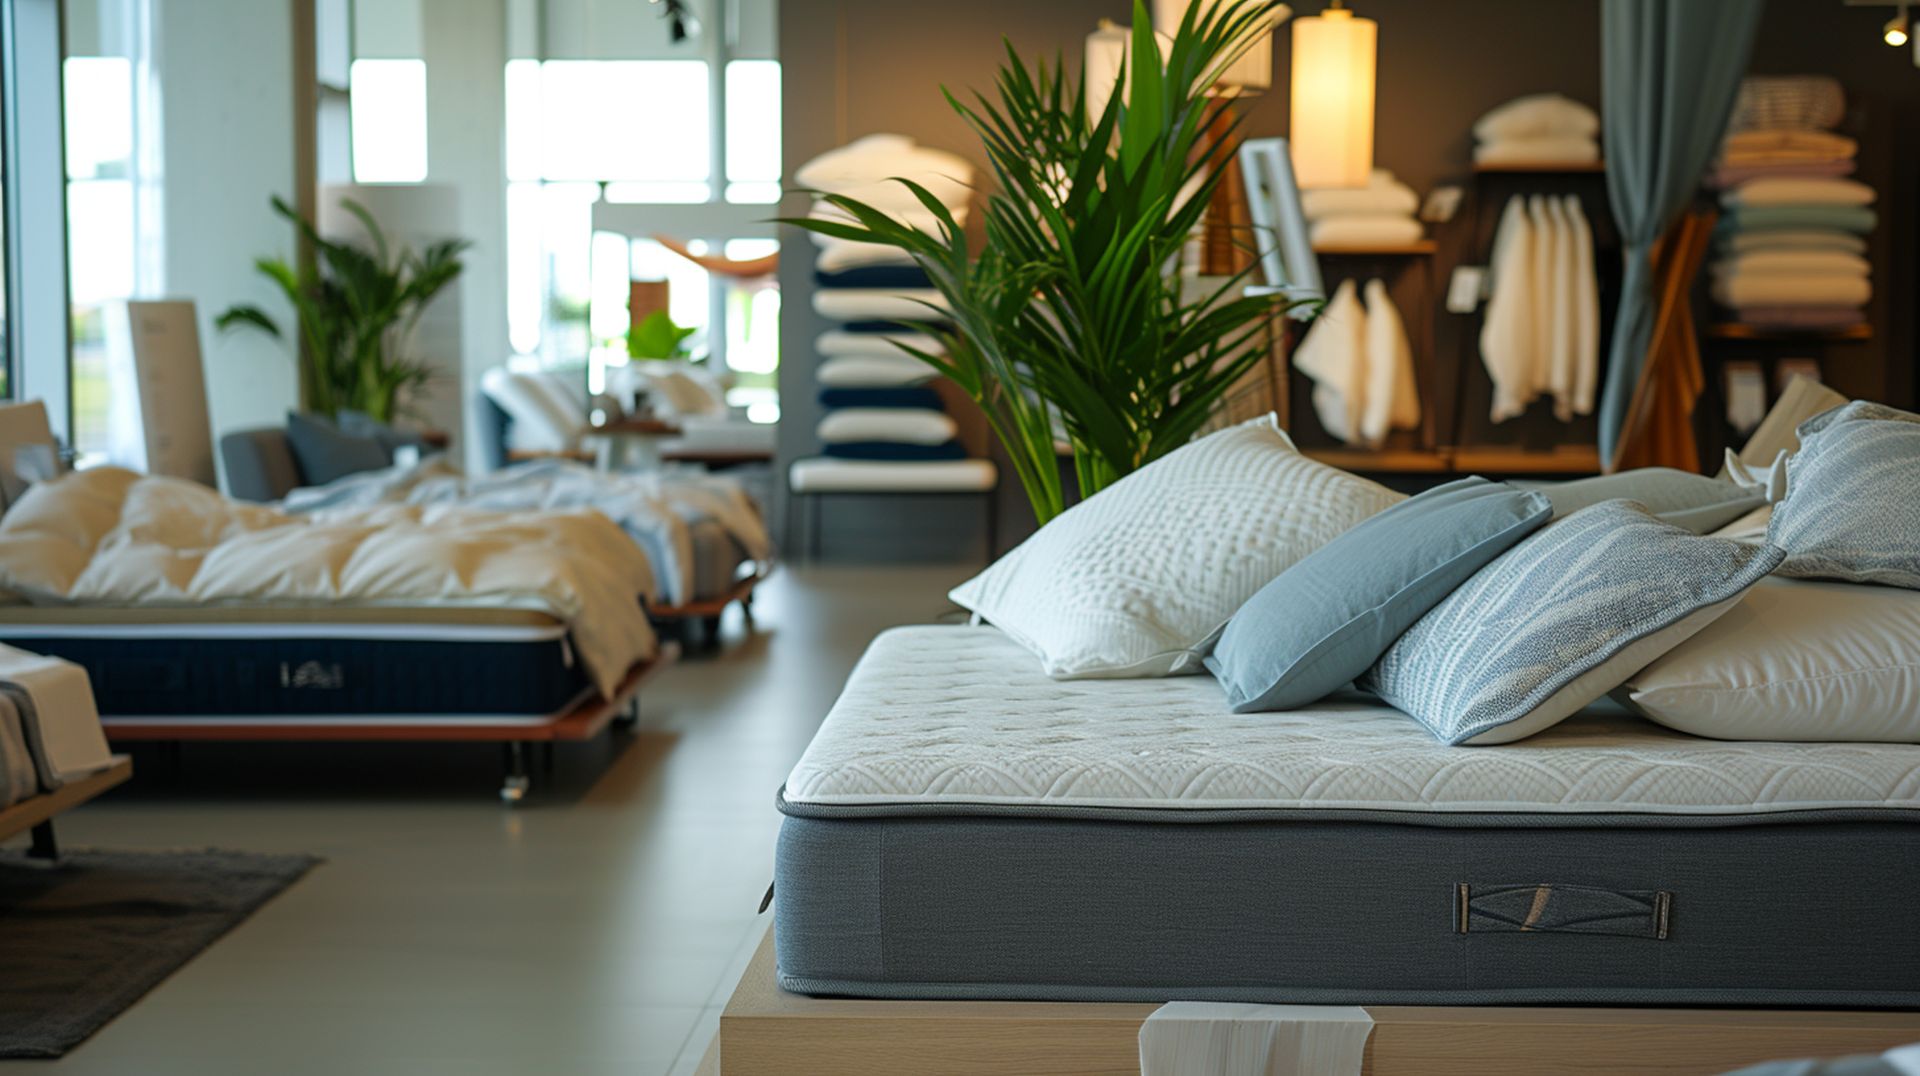 If you're looking for a new bed, mattress stores in Mesa offer the best customer and delivery service, financing, and warranties in Arizona